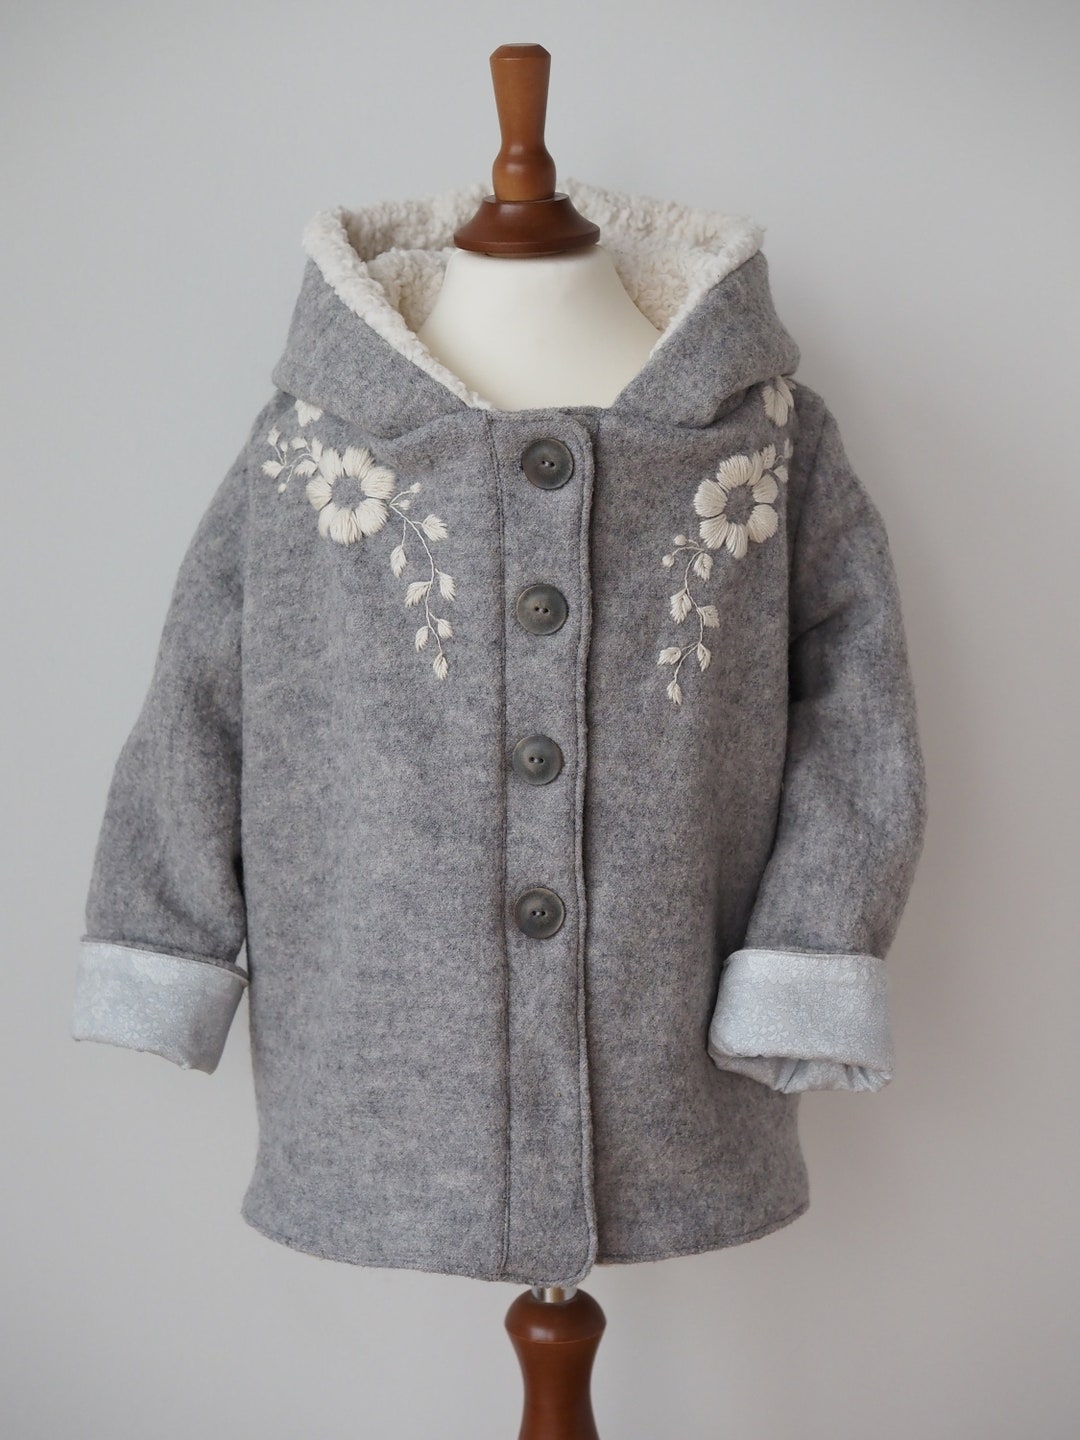 Hand-embroidered Floral Wool Coat - Etsy